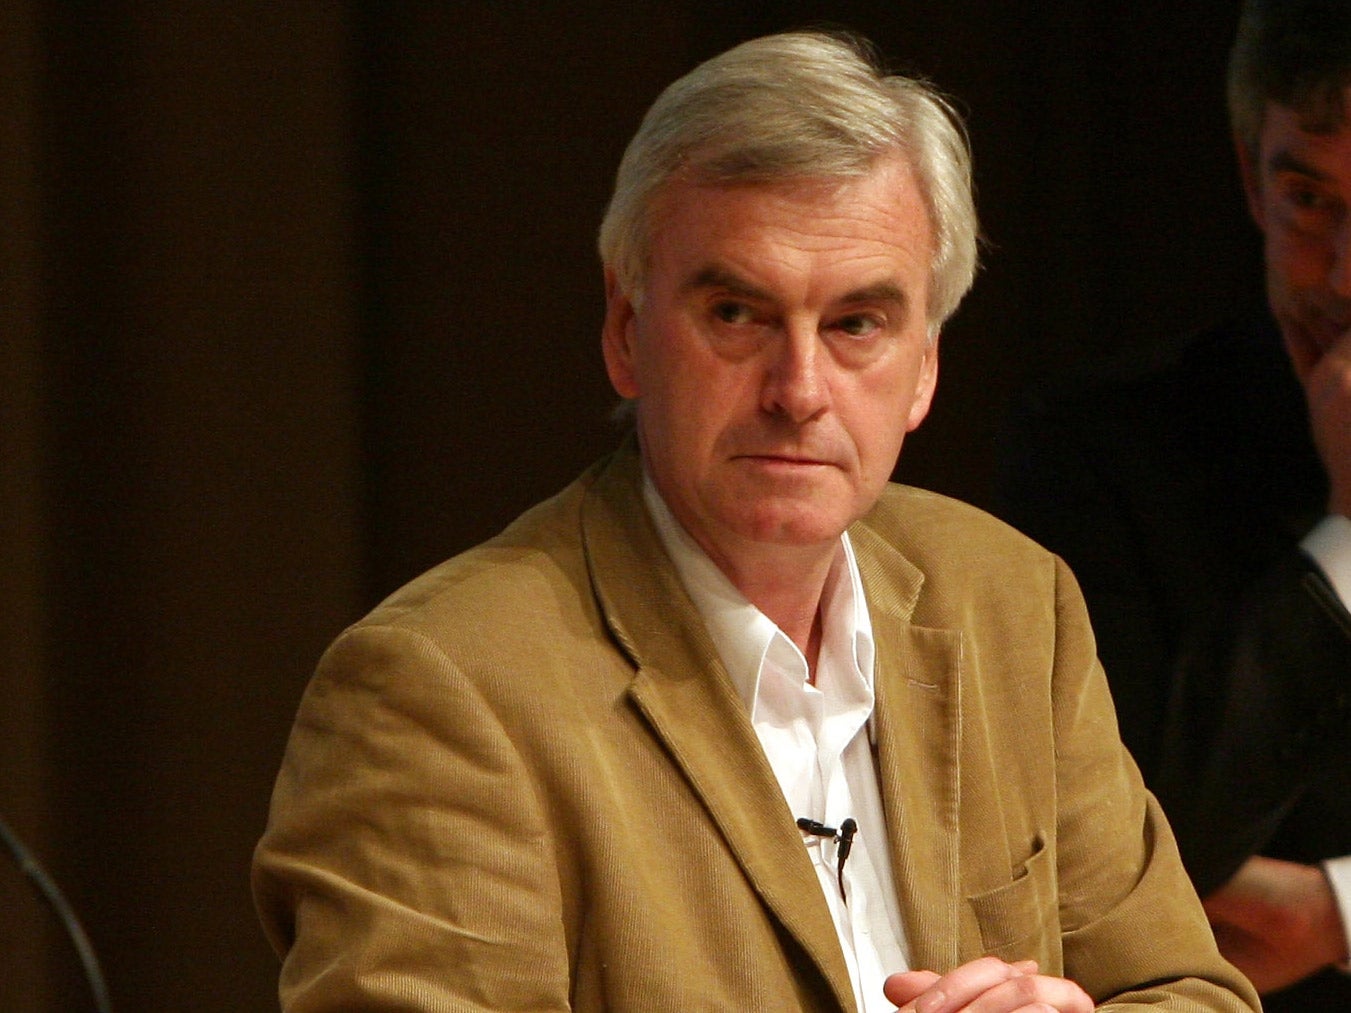 John McDonnell, the new shadow chancellor